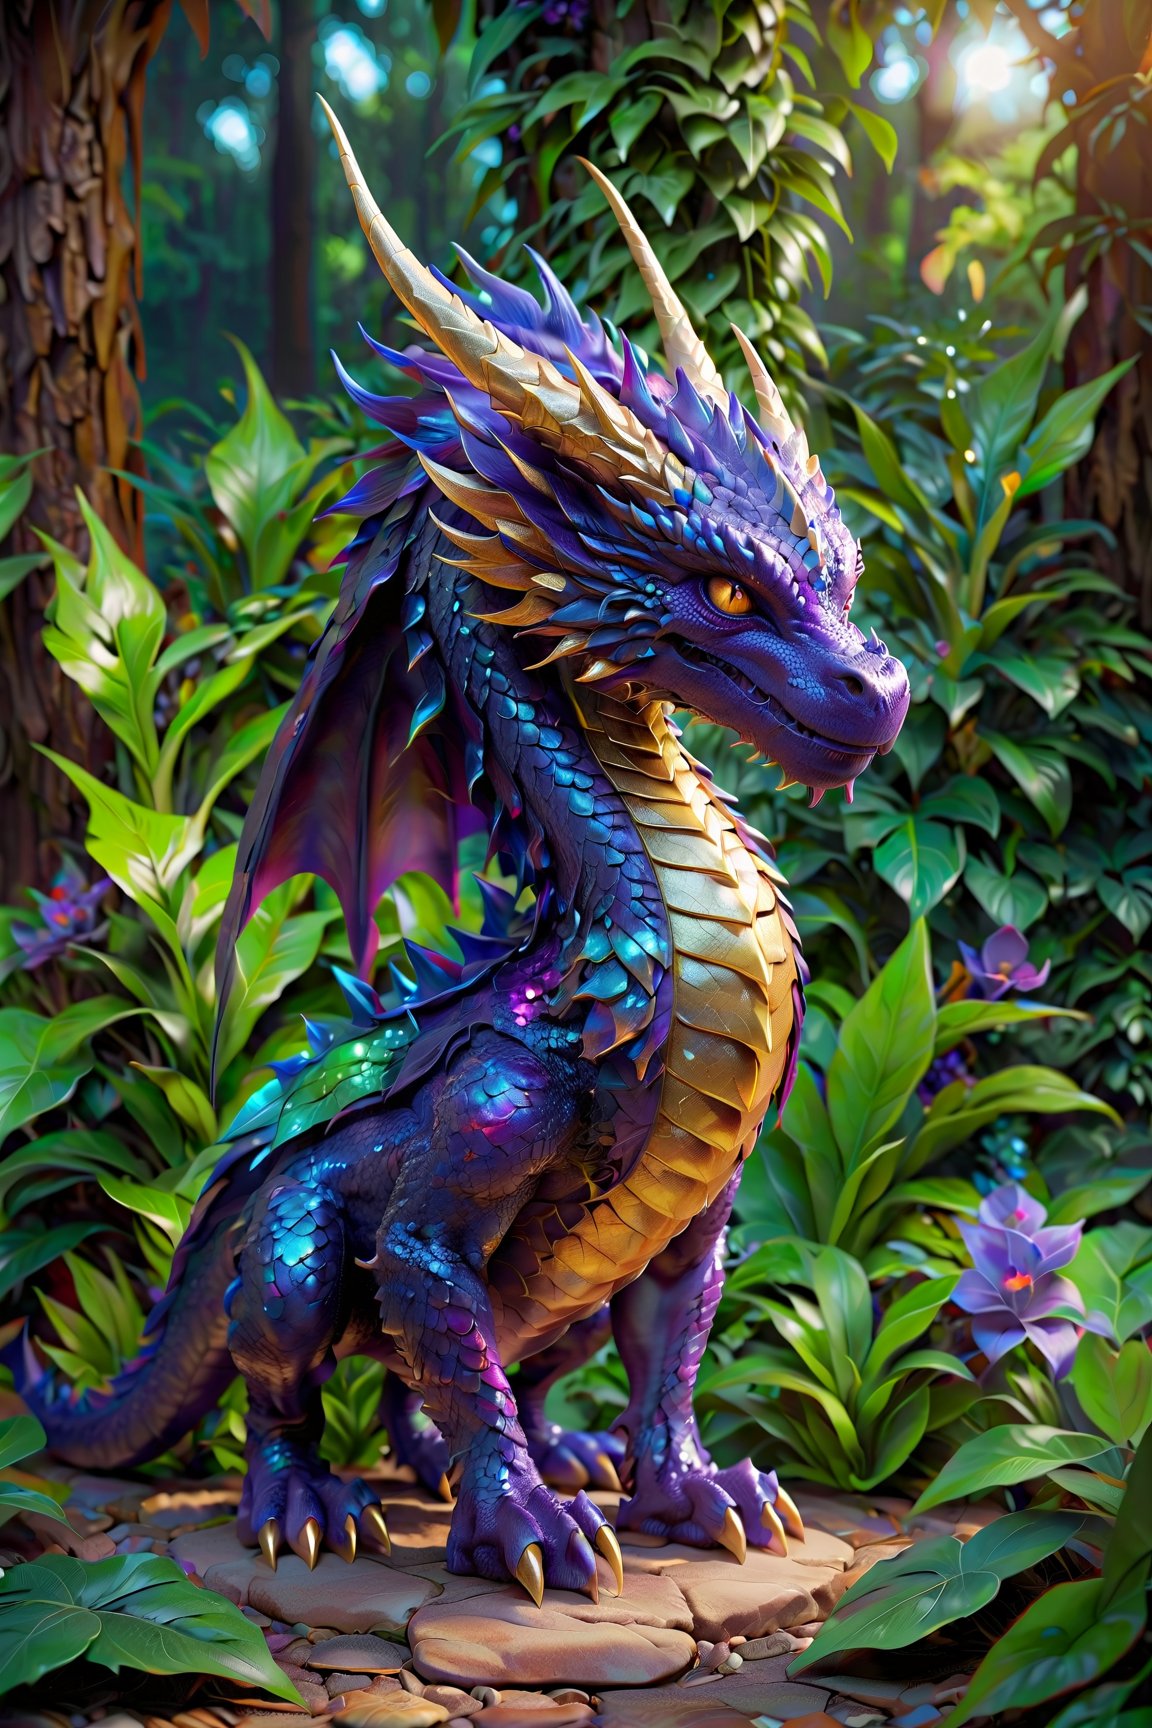 enigma, octane rendering, unreal engine, cinematic, hyperrealism, 16k, depth of field, bokeh.iridescent accents.vibrant.Dragon cub made like the video game character Spyro, with dragon scales with a shiny purple and gold outline, horns golden and two red wings, it has four purple legs, a charismatic personality, a cunning look, the dragon has the tip of its tail in the shape of a golden arrow. In color, each scale shines with iridescent hues, transforming the ordinary into a fascinating spectacle,dragon-themed
